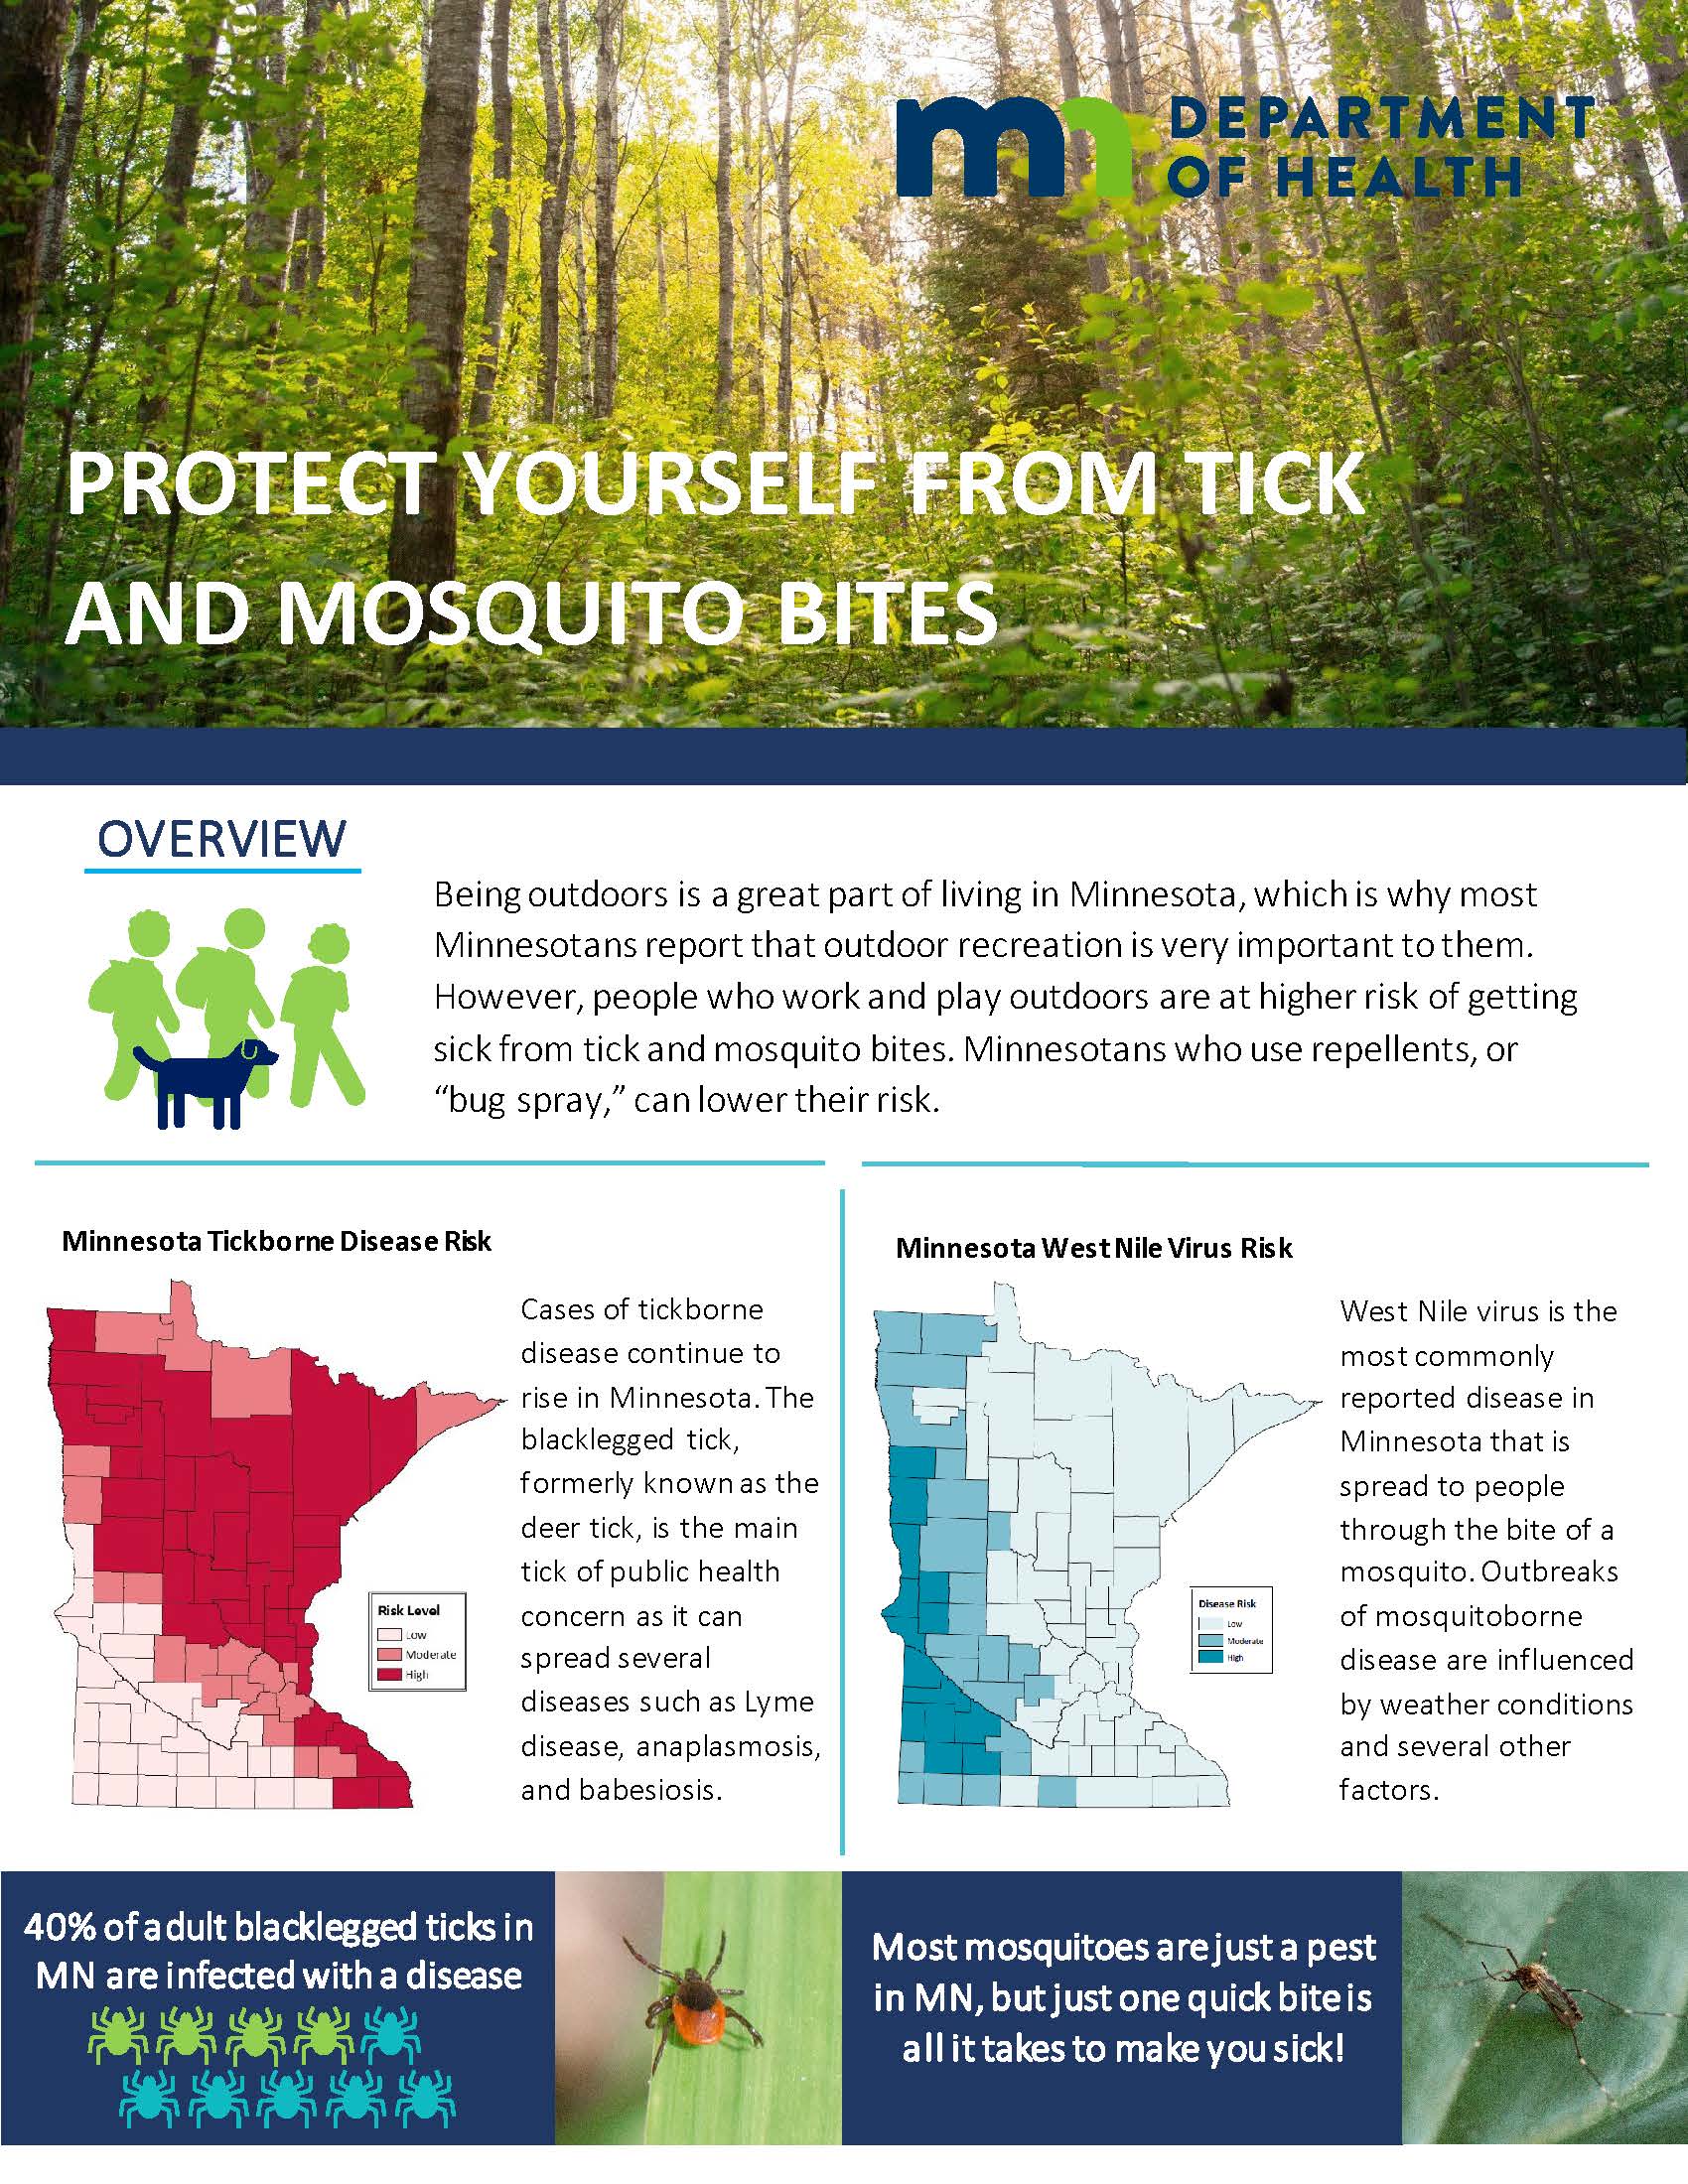 Protect yourself from tick and moquito bites